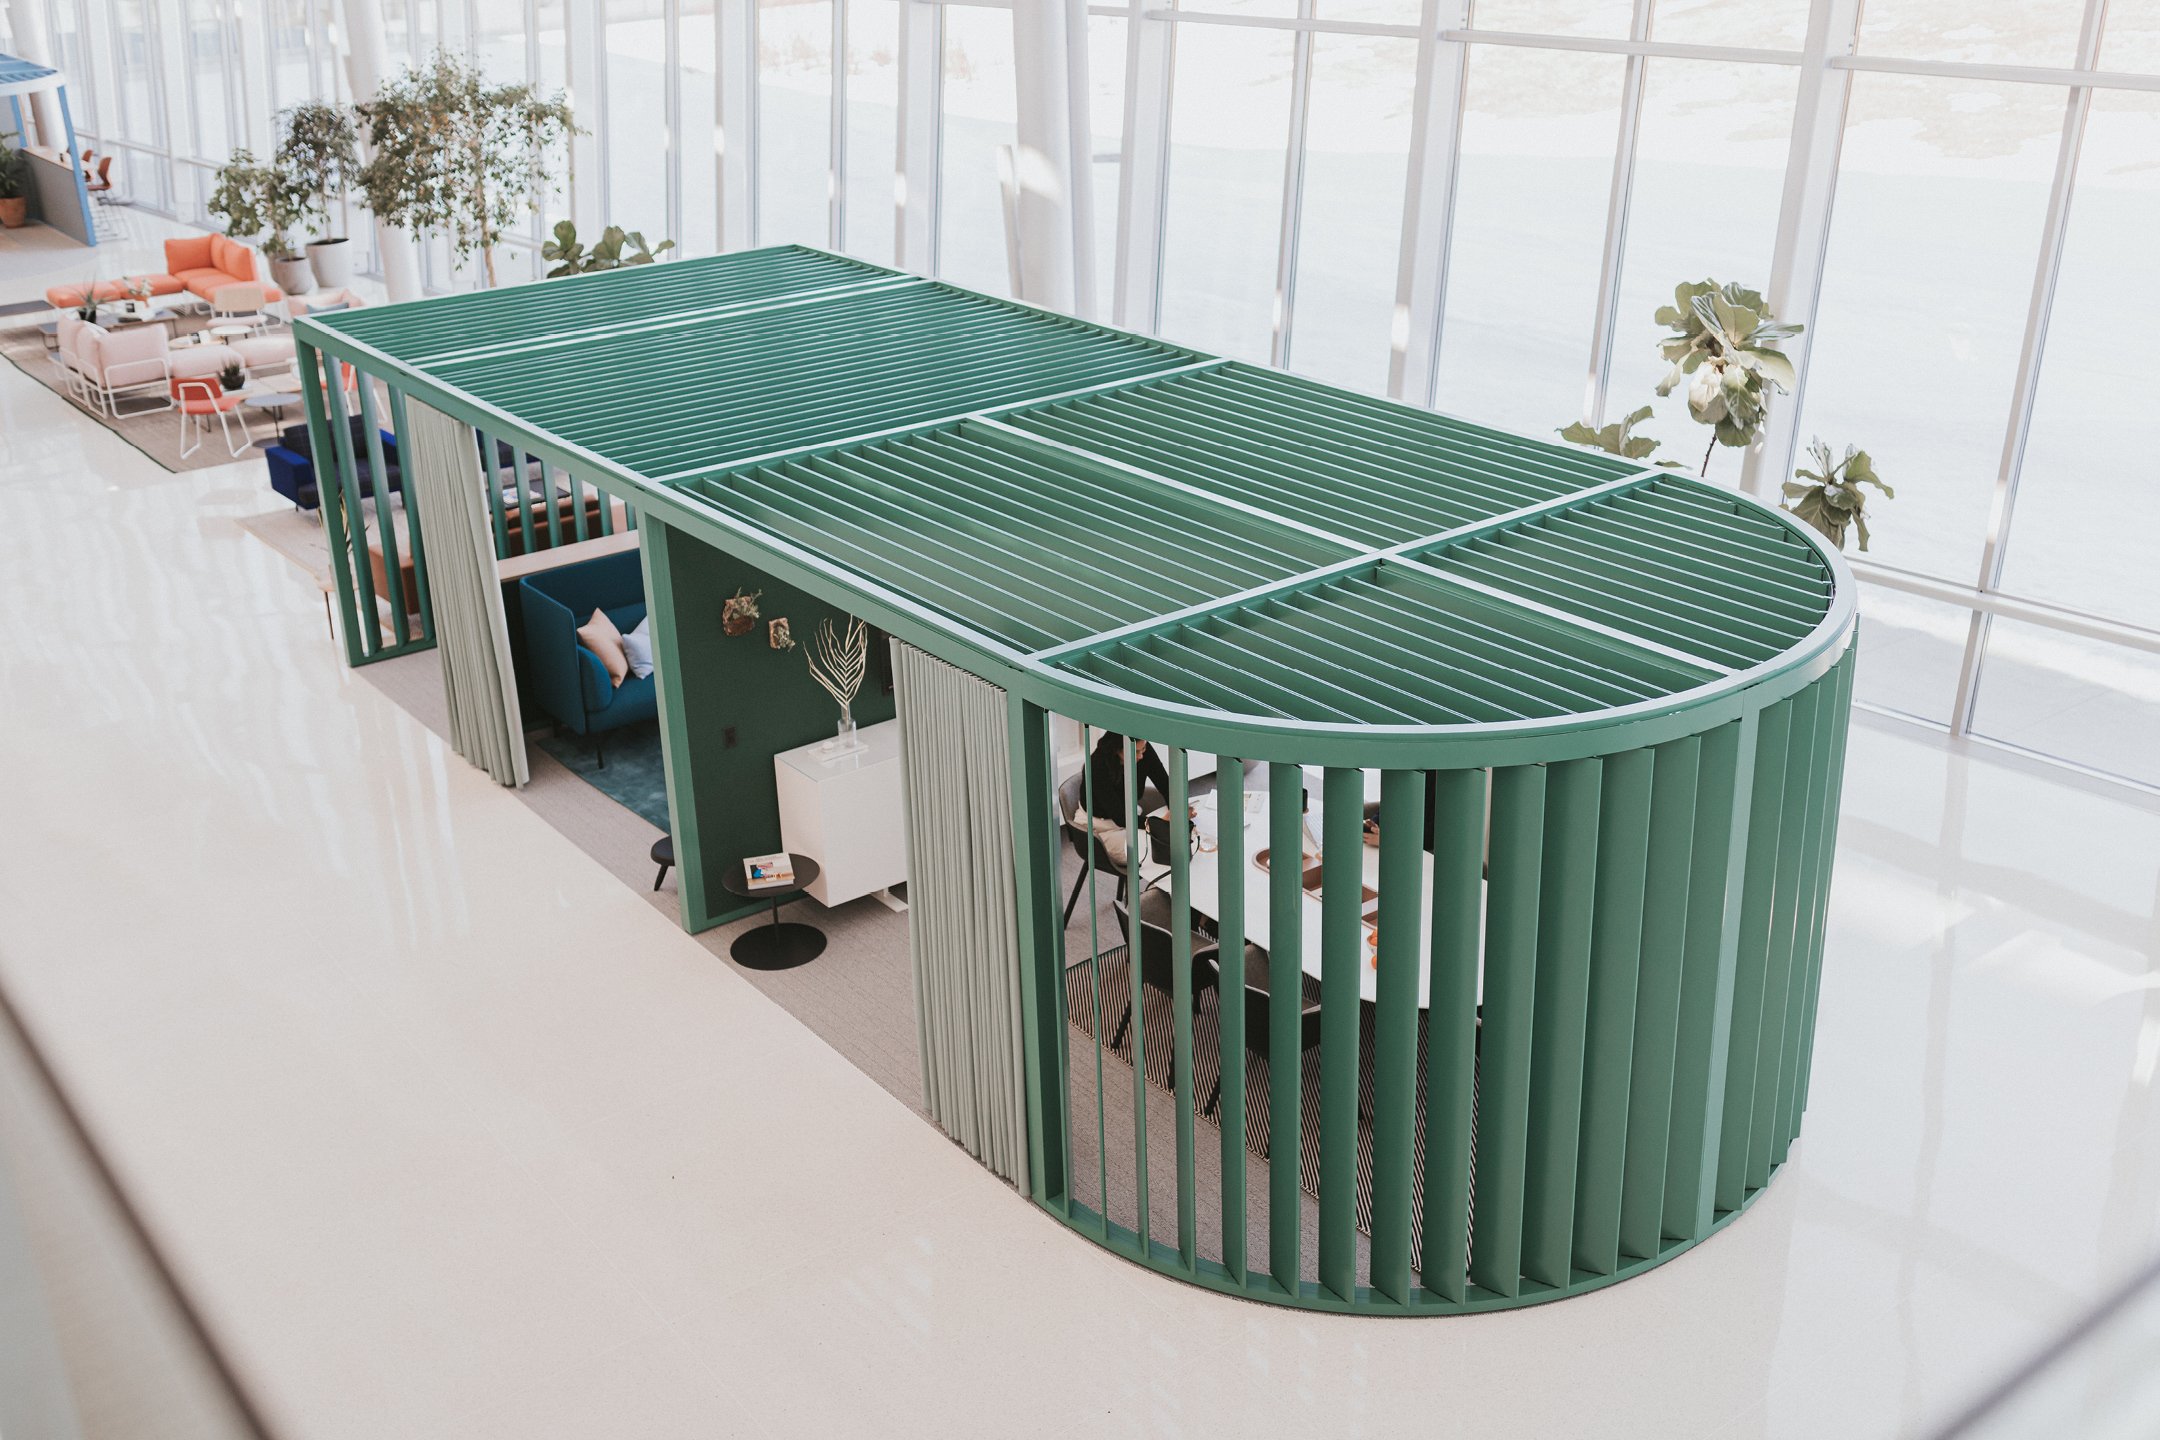 Haworth Pergola Workspace in green color and curtains in open office space with employees working at white desk and white storage space